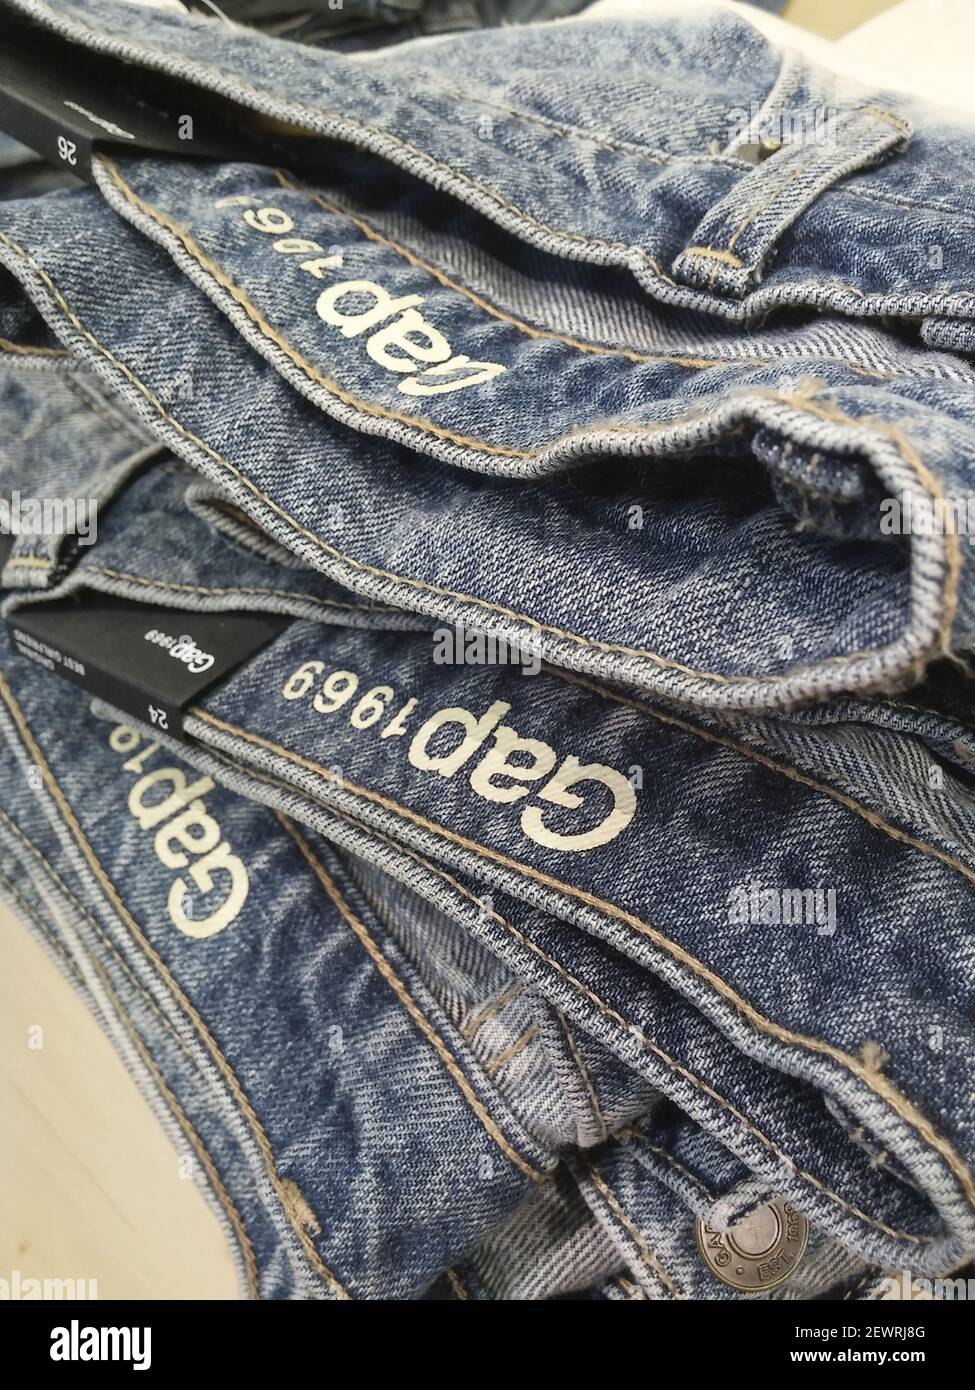 Gap 1969 brand jeans in a Gap store in New York on Monday, July 4, 2016.  After years of athleisure wear popularity a revival of denim appears to be  forming with fashion